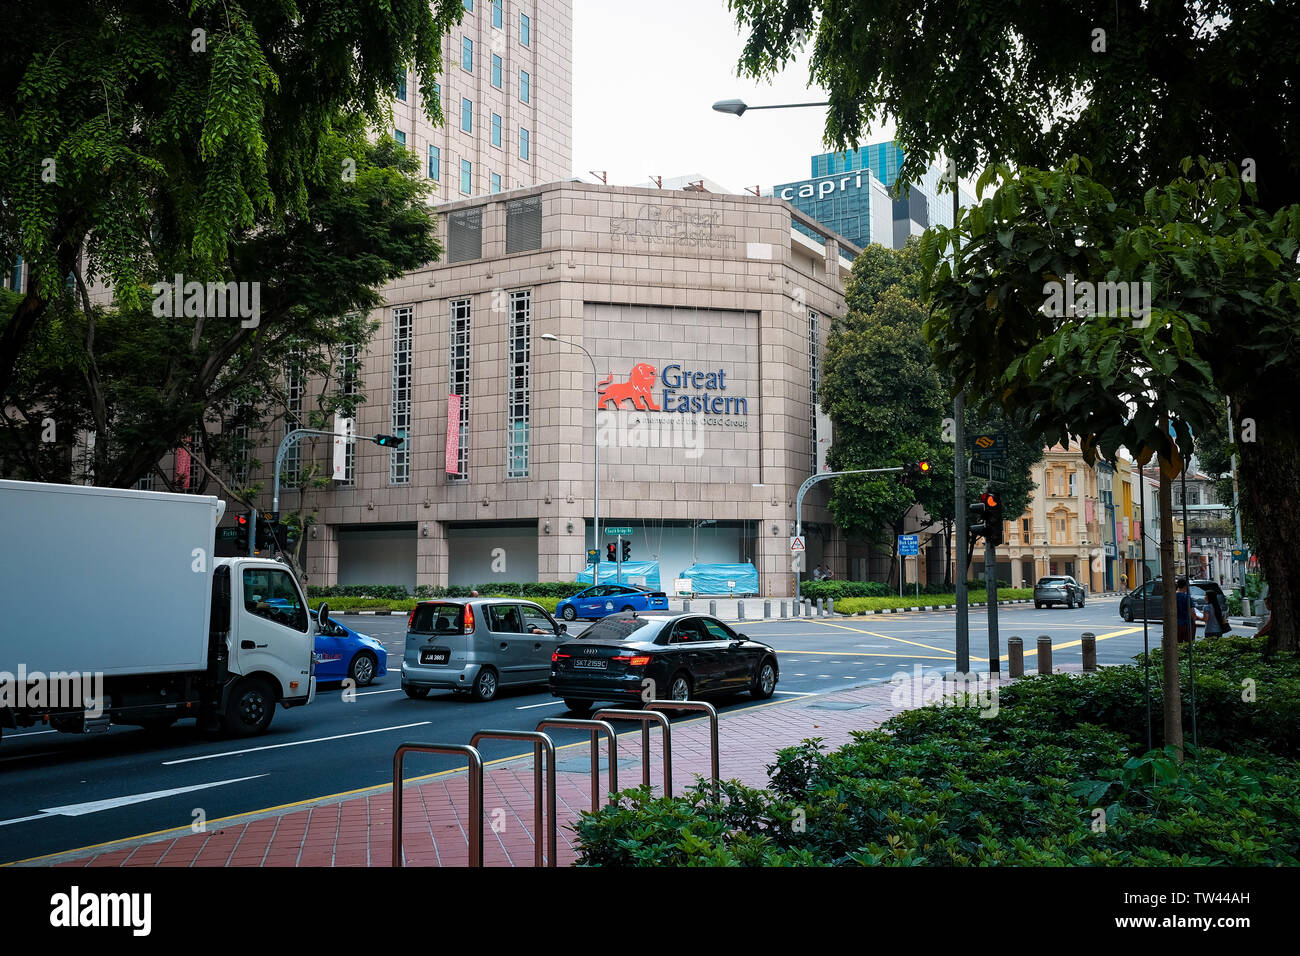 Great Eastern Life logo and building in Singapore Pickering Street. Stock Photo